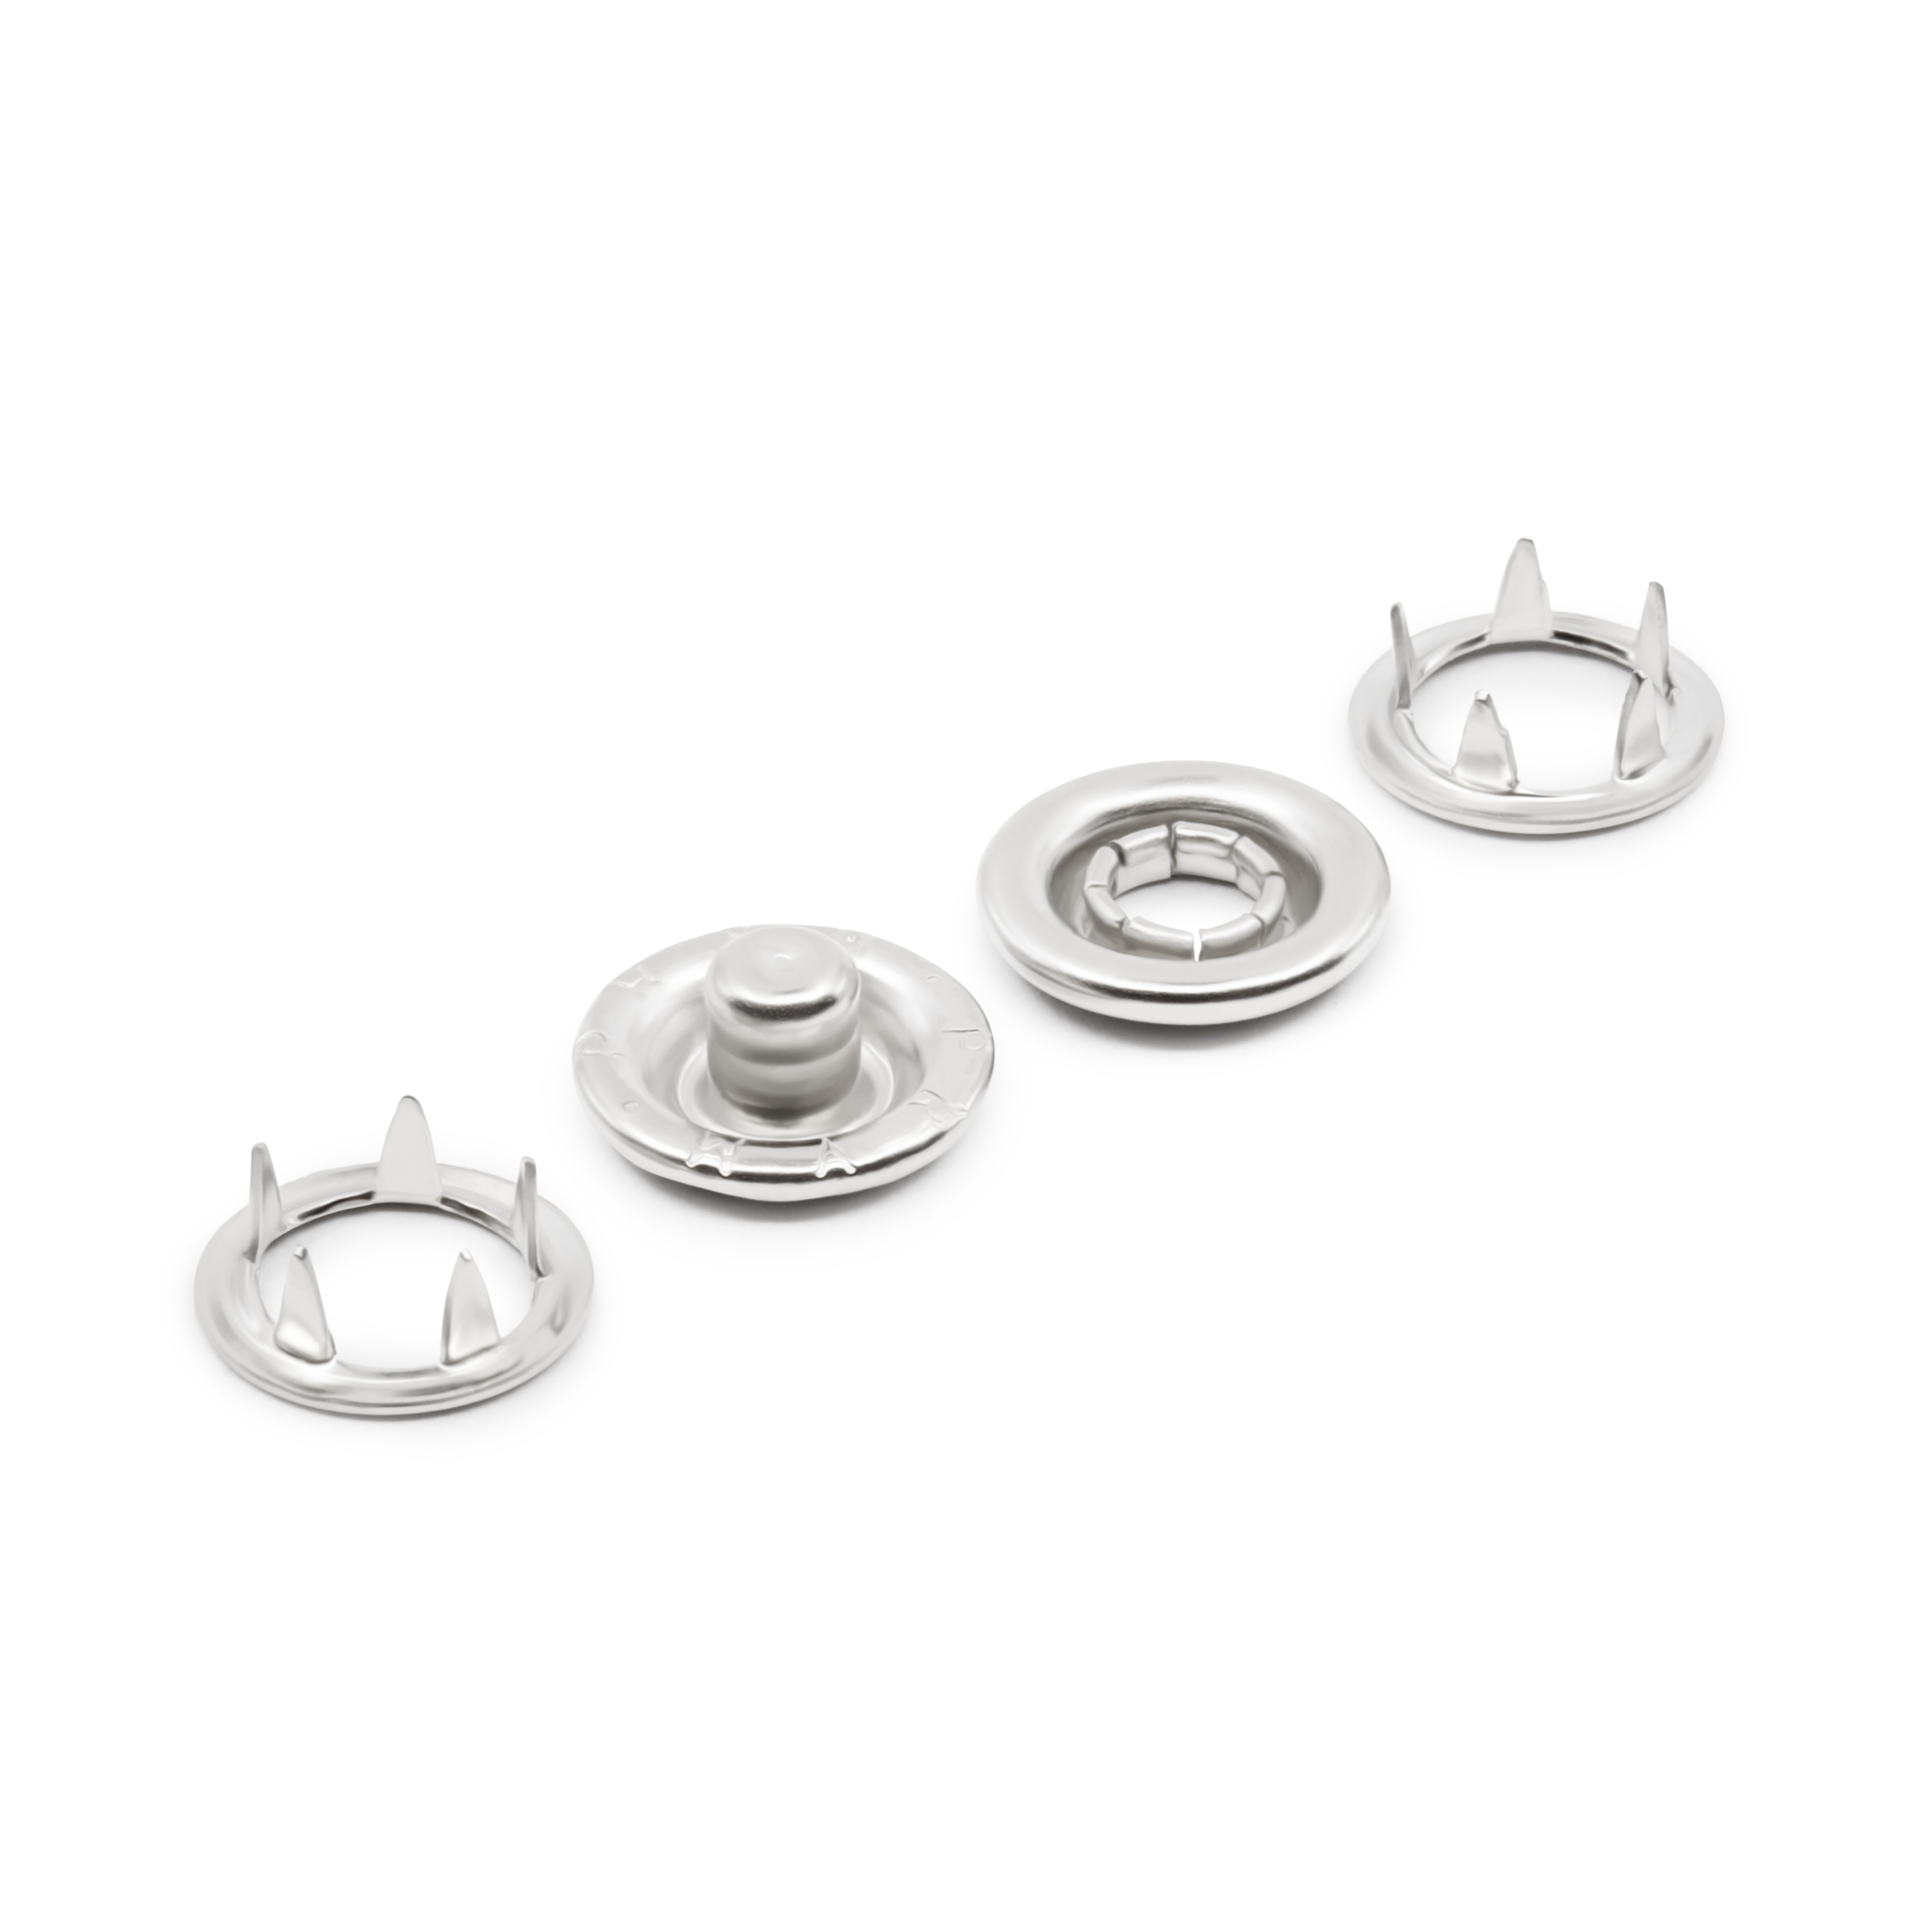 Prym No-Sew Snap Fasteners Jersey Prong Ring 10 mm 01 Silver 